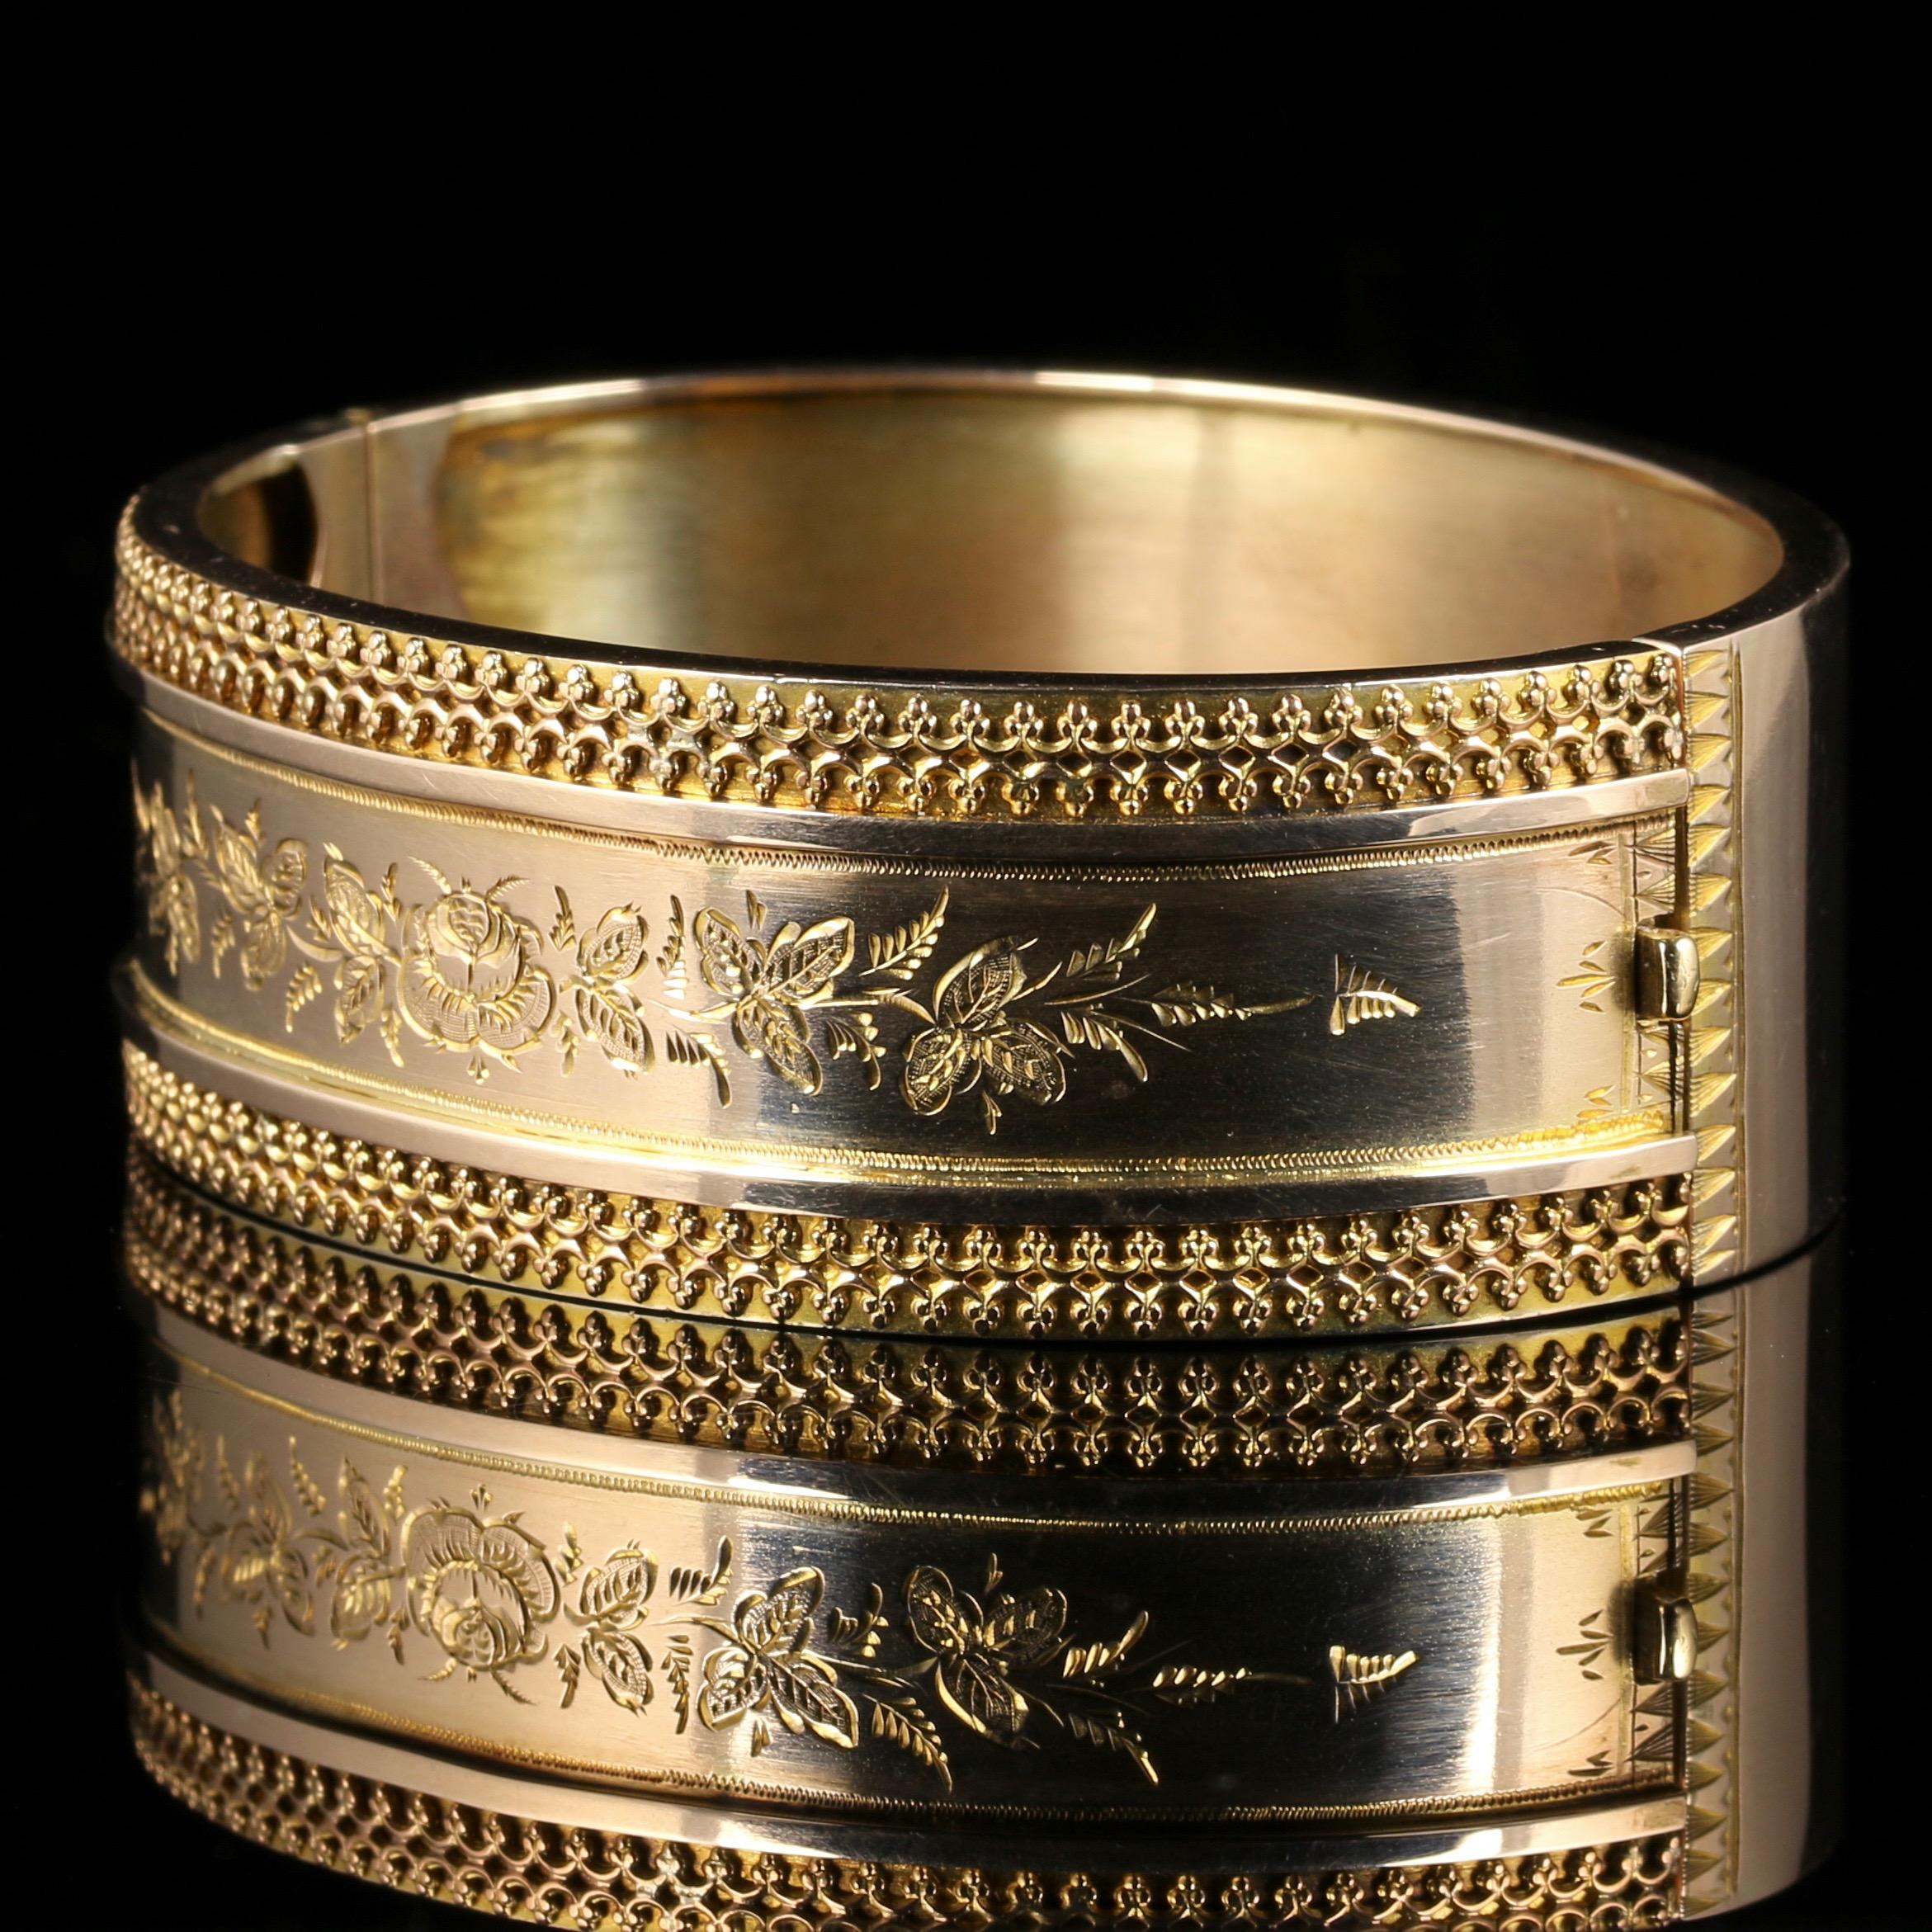 For more details please click continue reading down below...

This lovely antique Victorian fancy bangle is beautiful, Circa 1880.

Set in 9ct Yellow Gold.

The front of the bangle is inlaid with a Gold floral gallery surrounded by fabulous